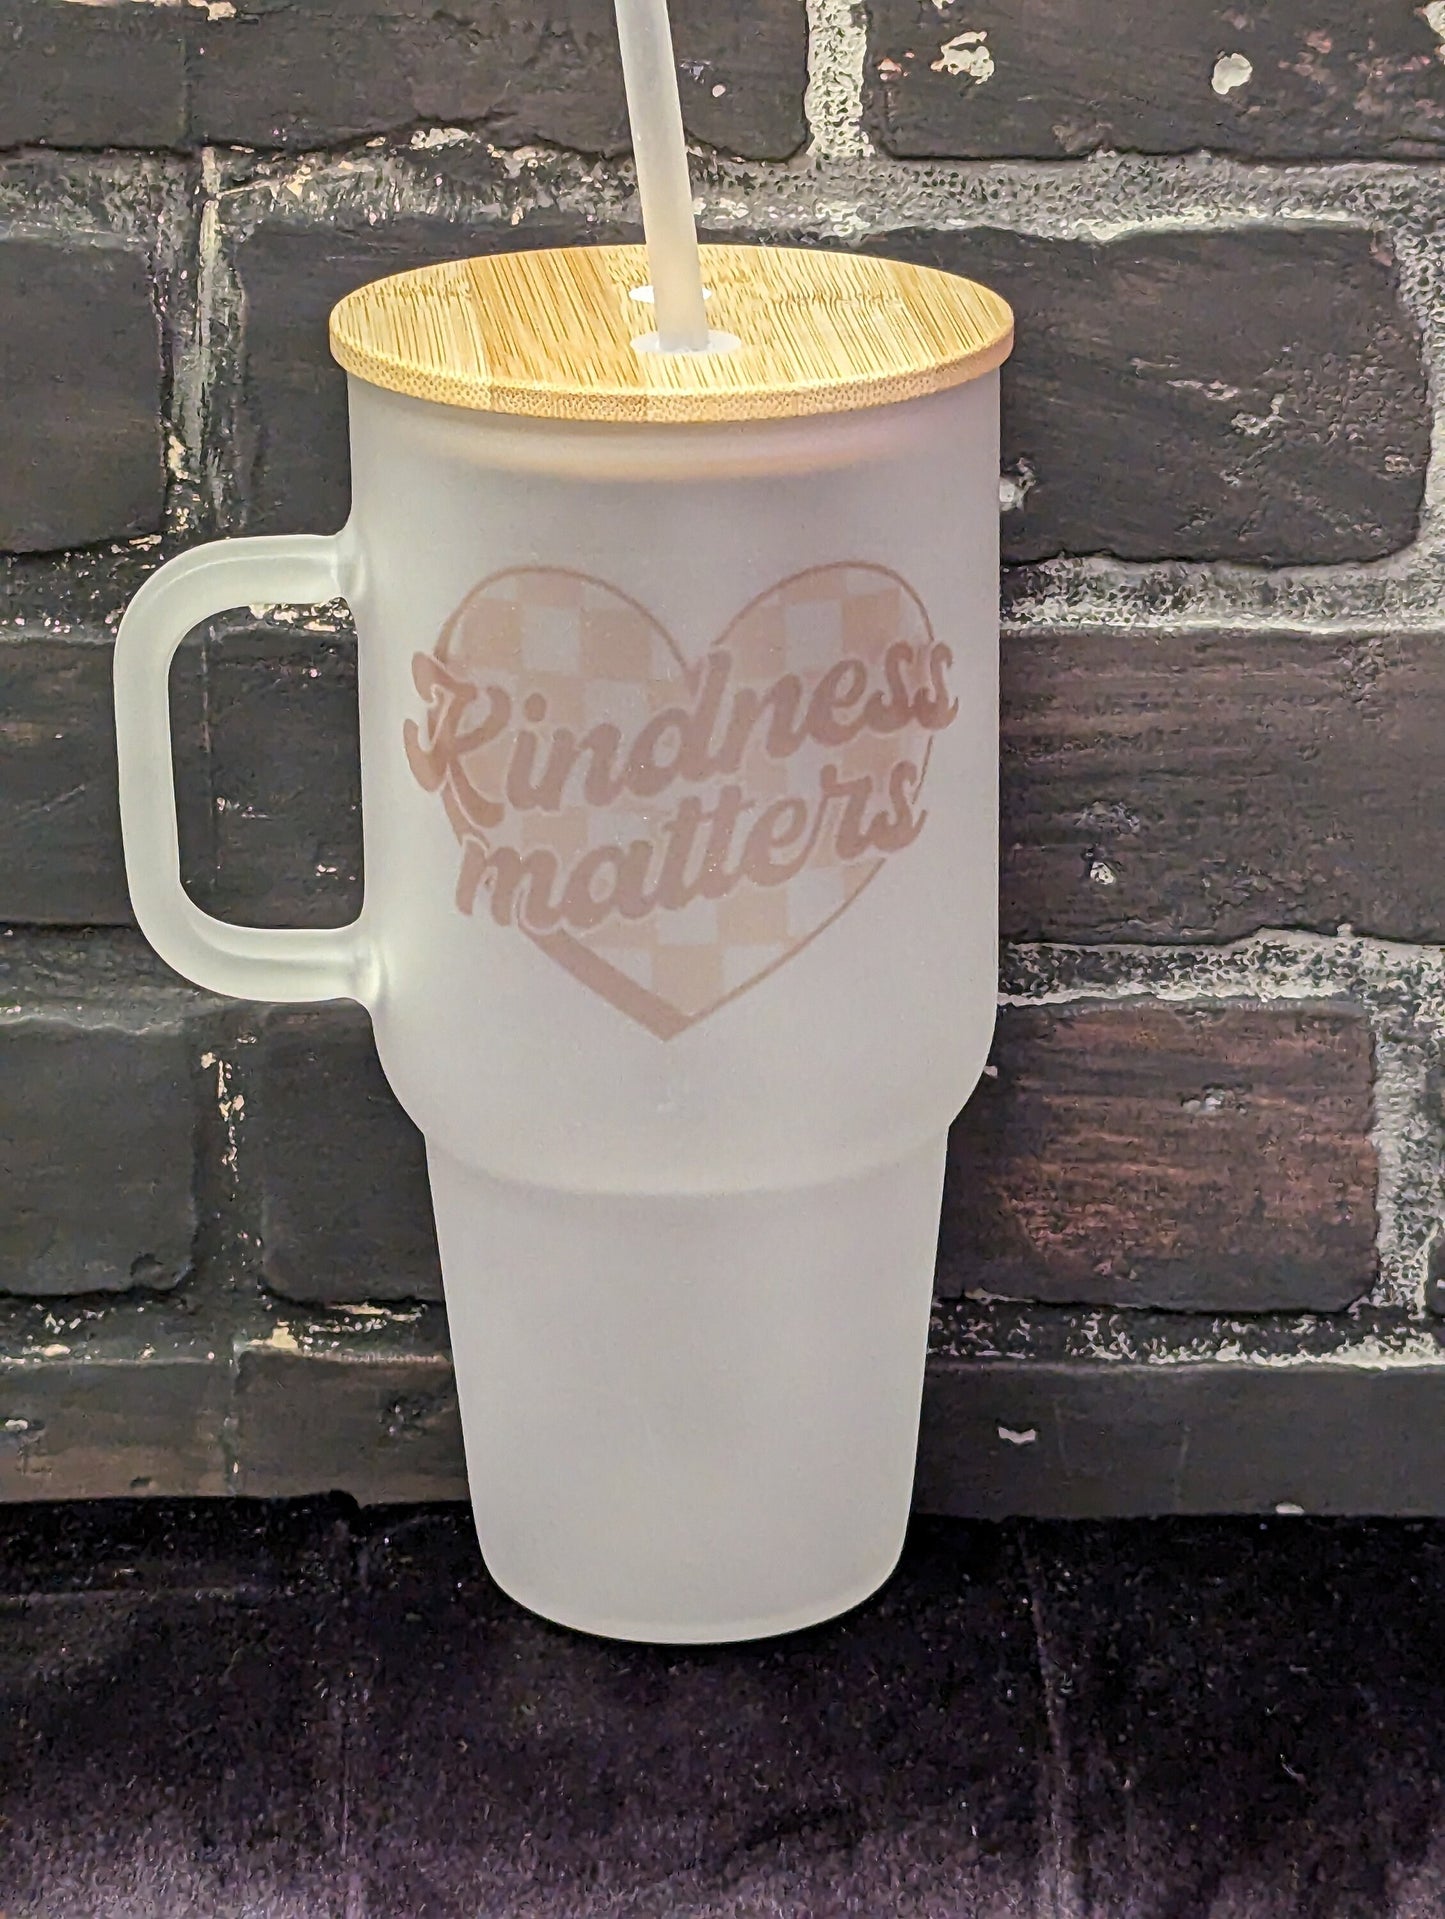 Kindness Matters, 32oz Frosted Glass Tumbler w/handle and straw